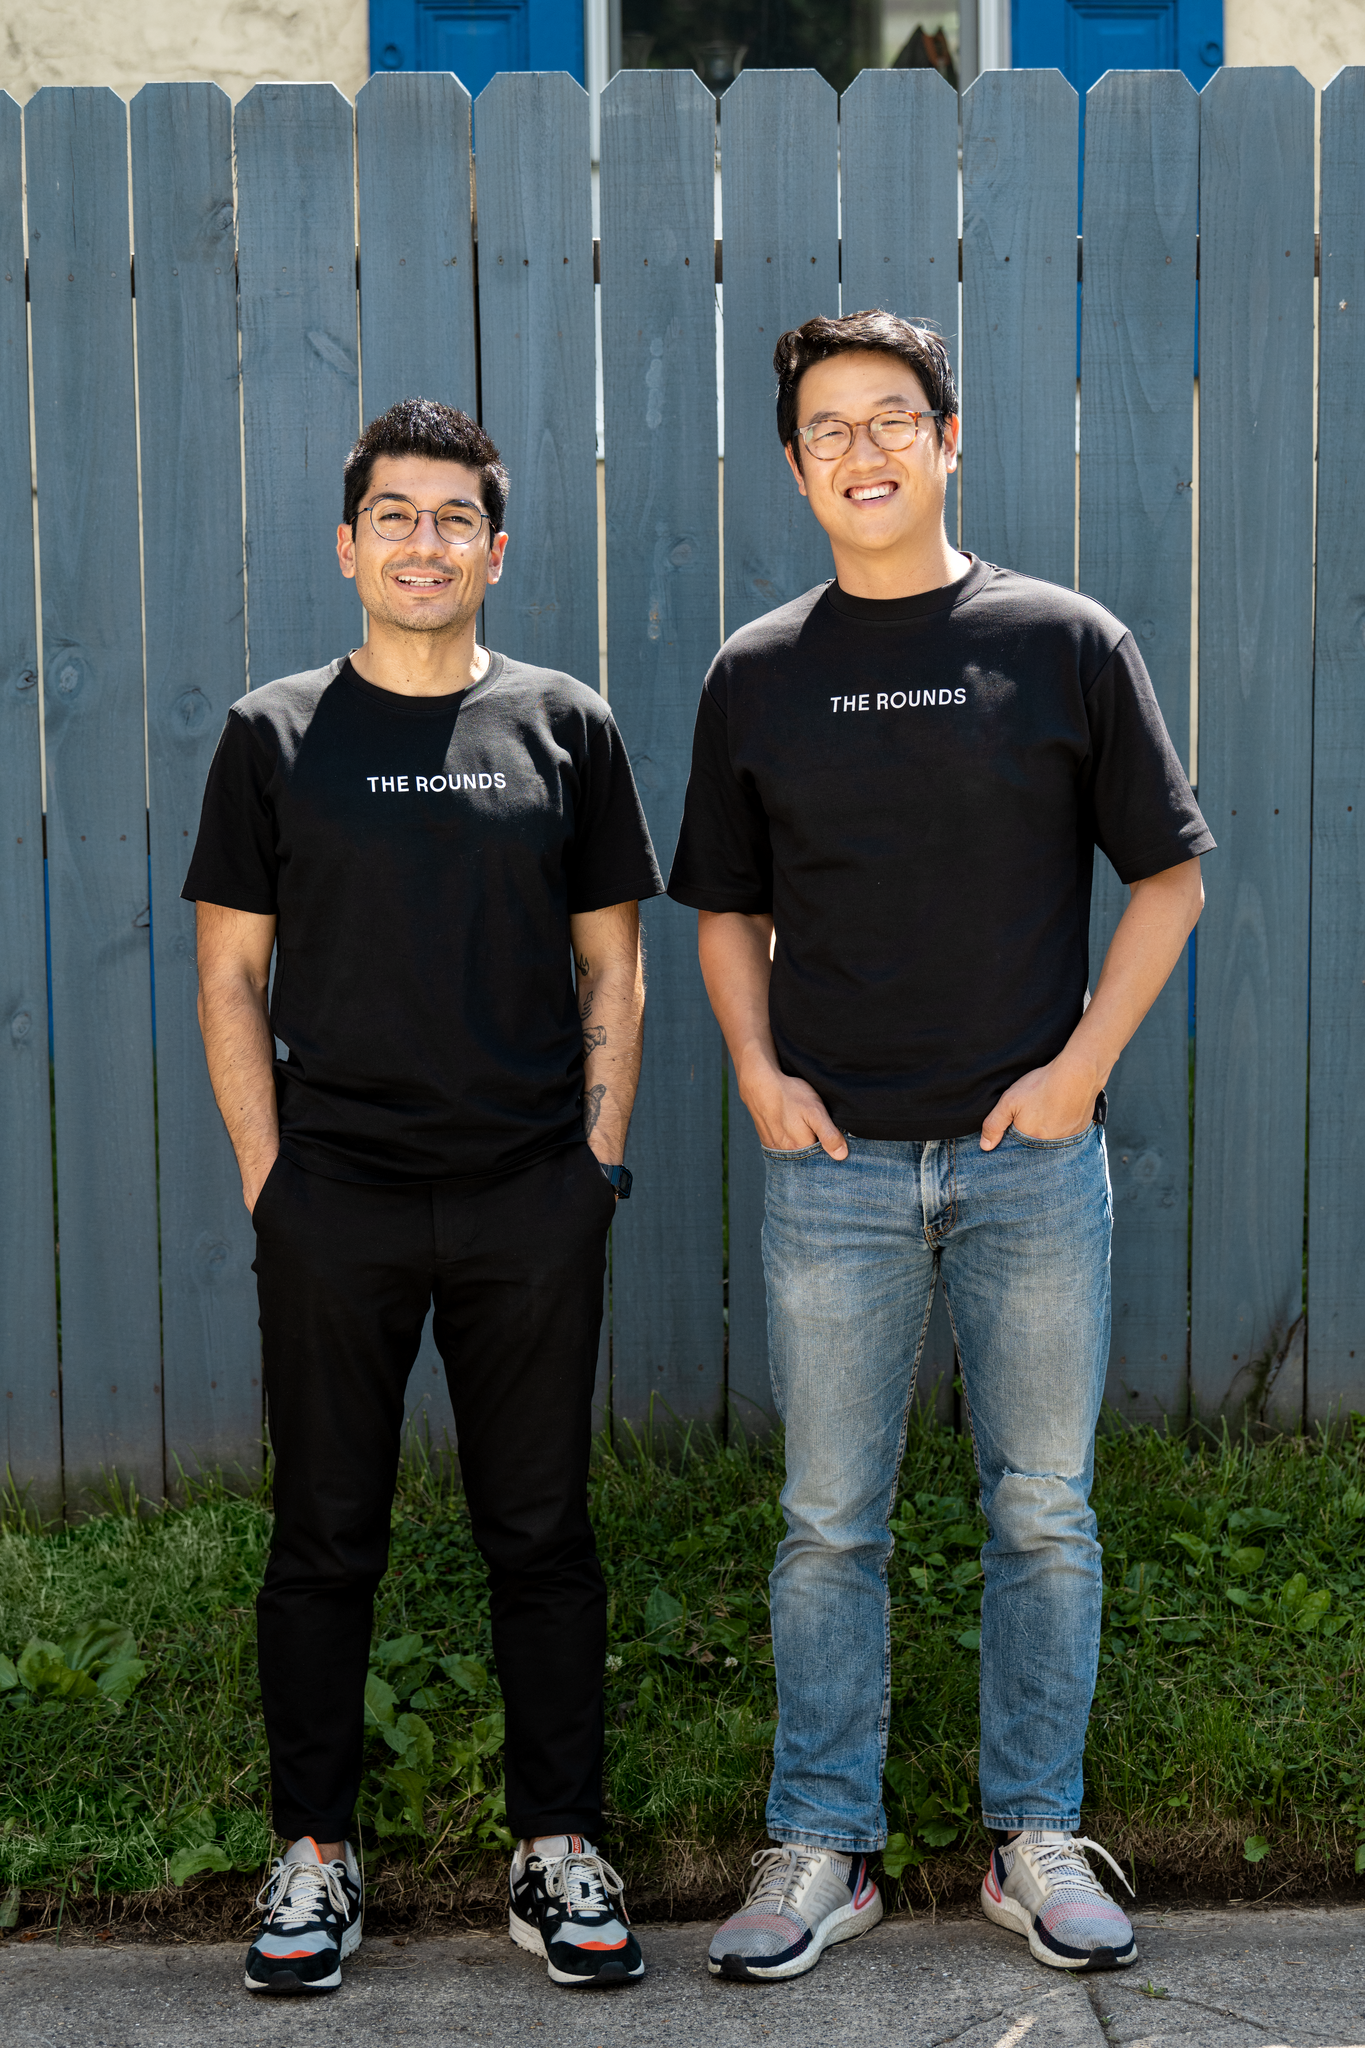 Co-founders of The Rounds, Alexander Torrey (left) and Byungwoo Ko, met at Wharton Business School.